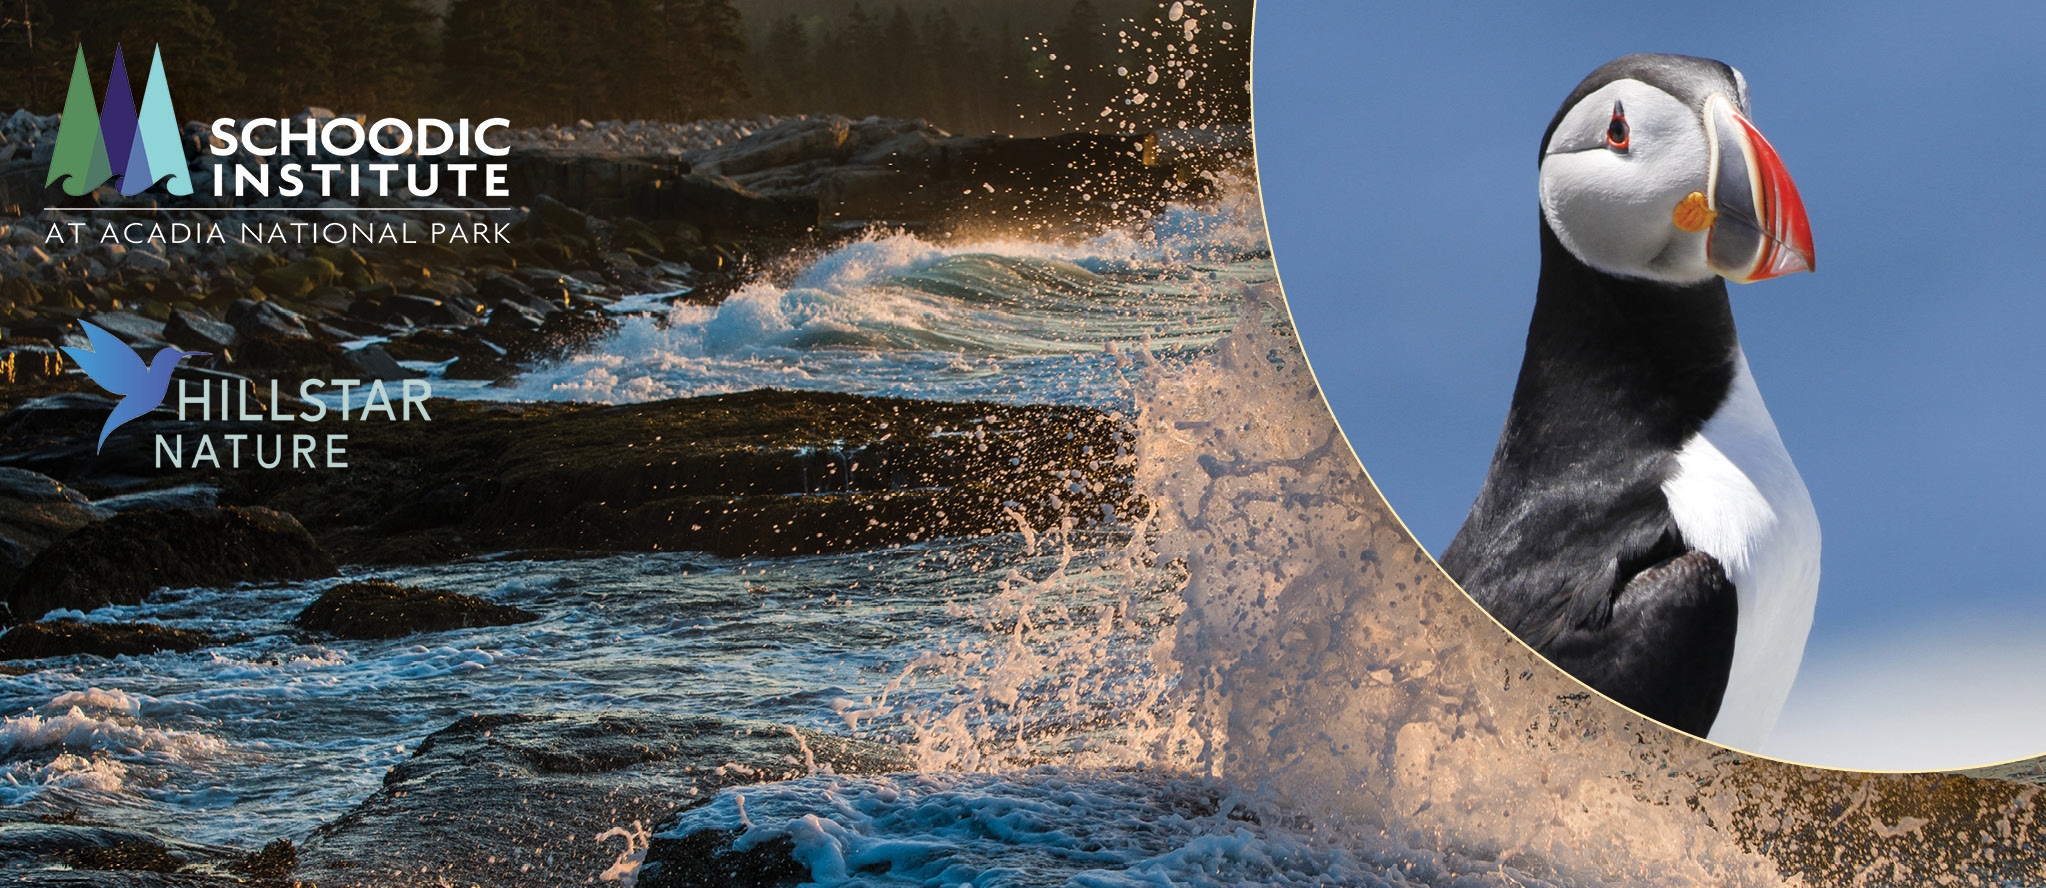 A photo collage of two images - in the background is a sunset view of the Maine coast, with waves crashing and spraying near the lens. Overlaid in the top right is an Atlantic puffin against a clear blue sky.